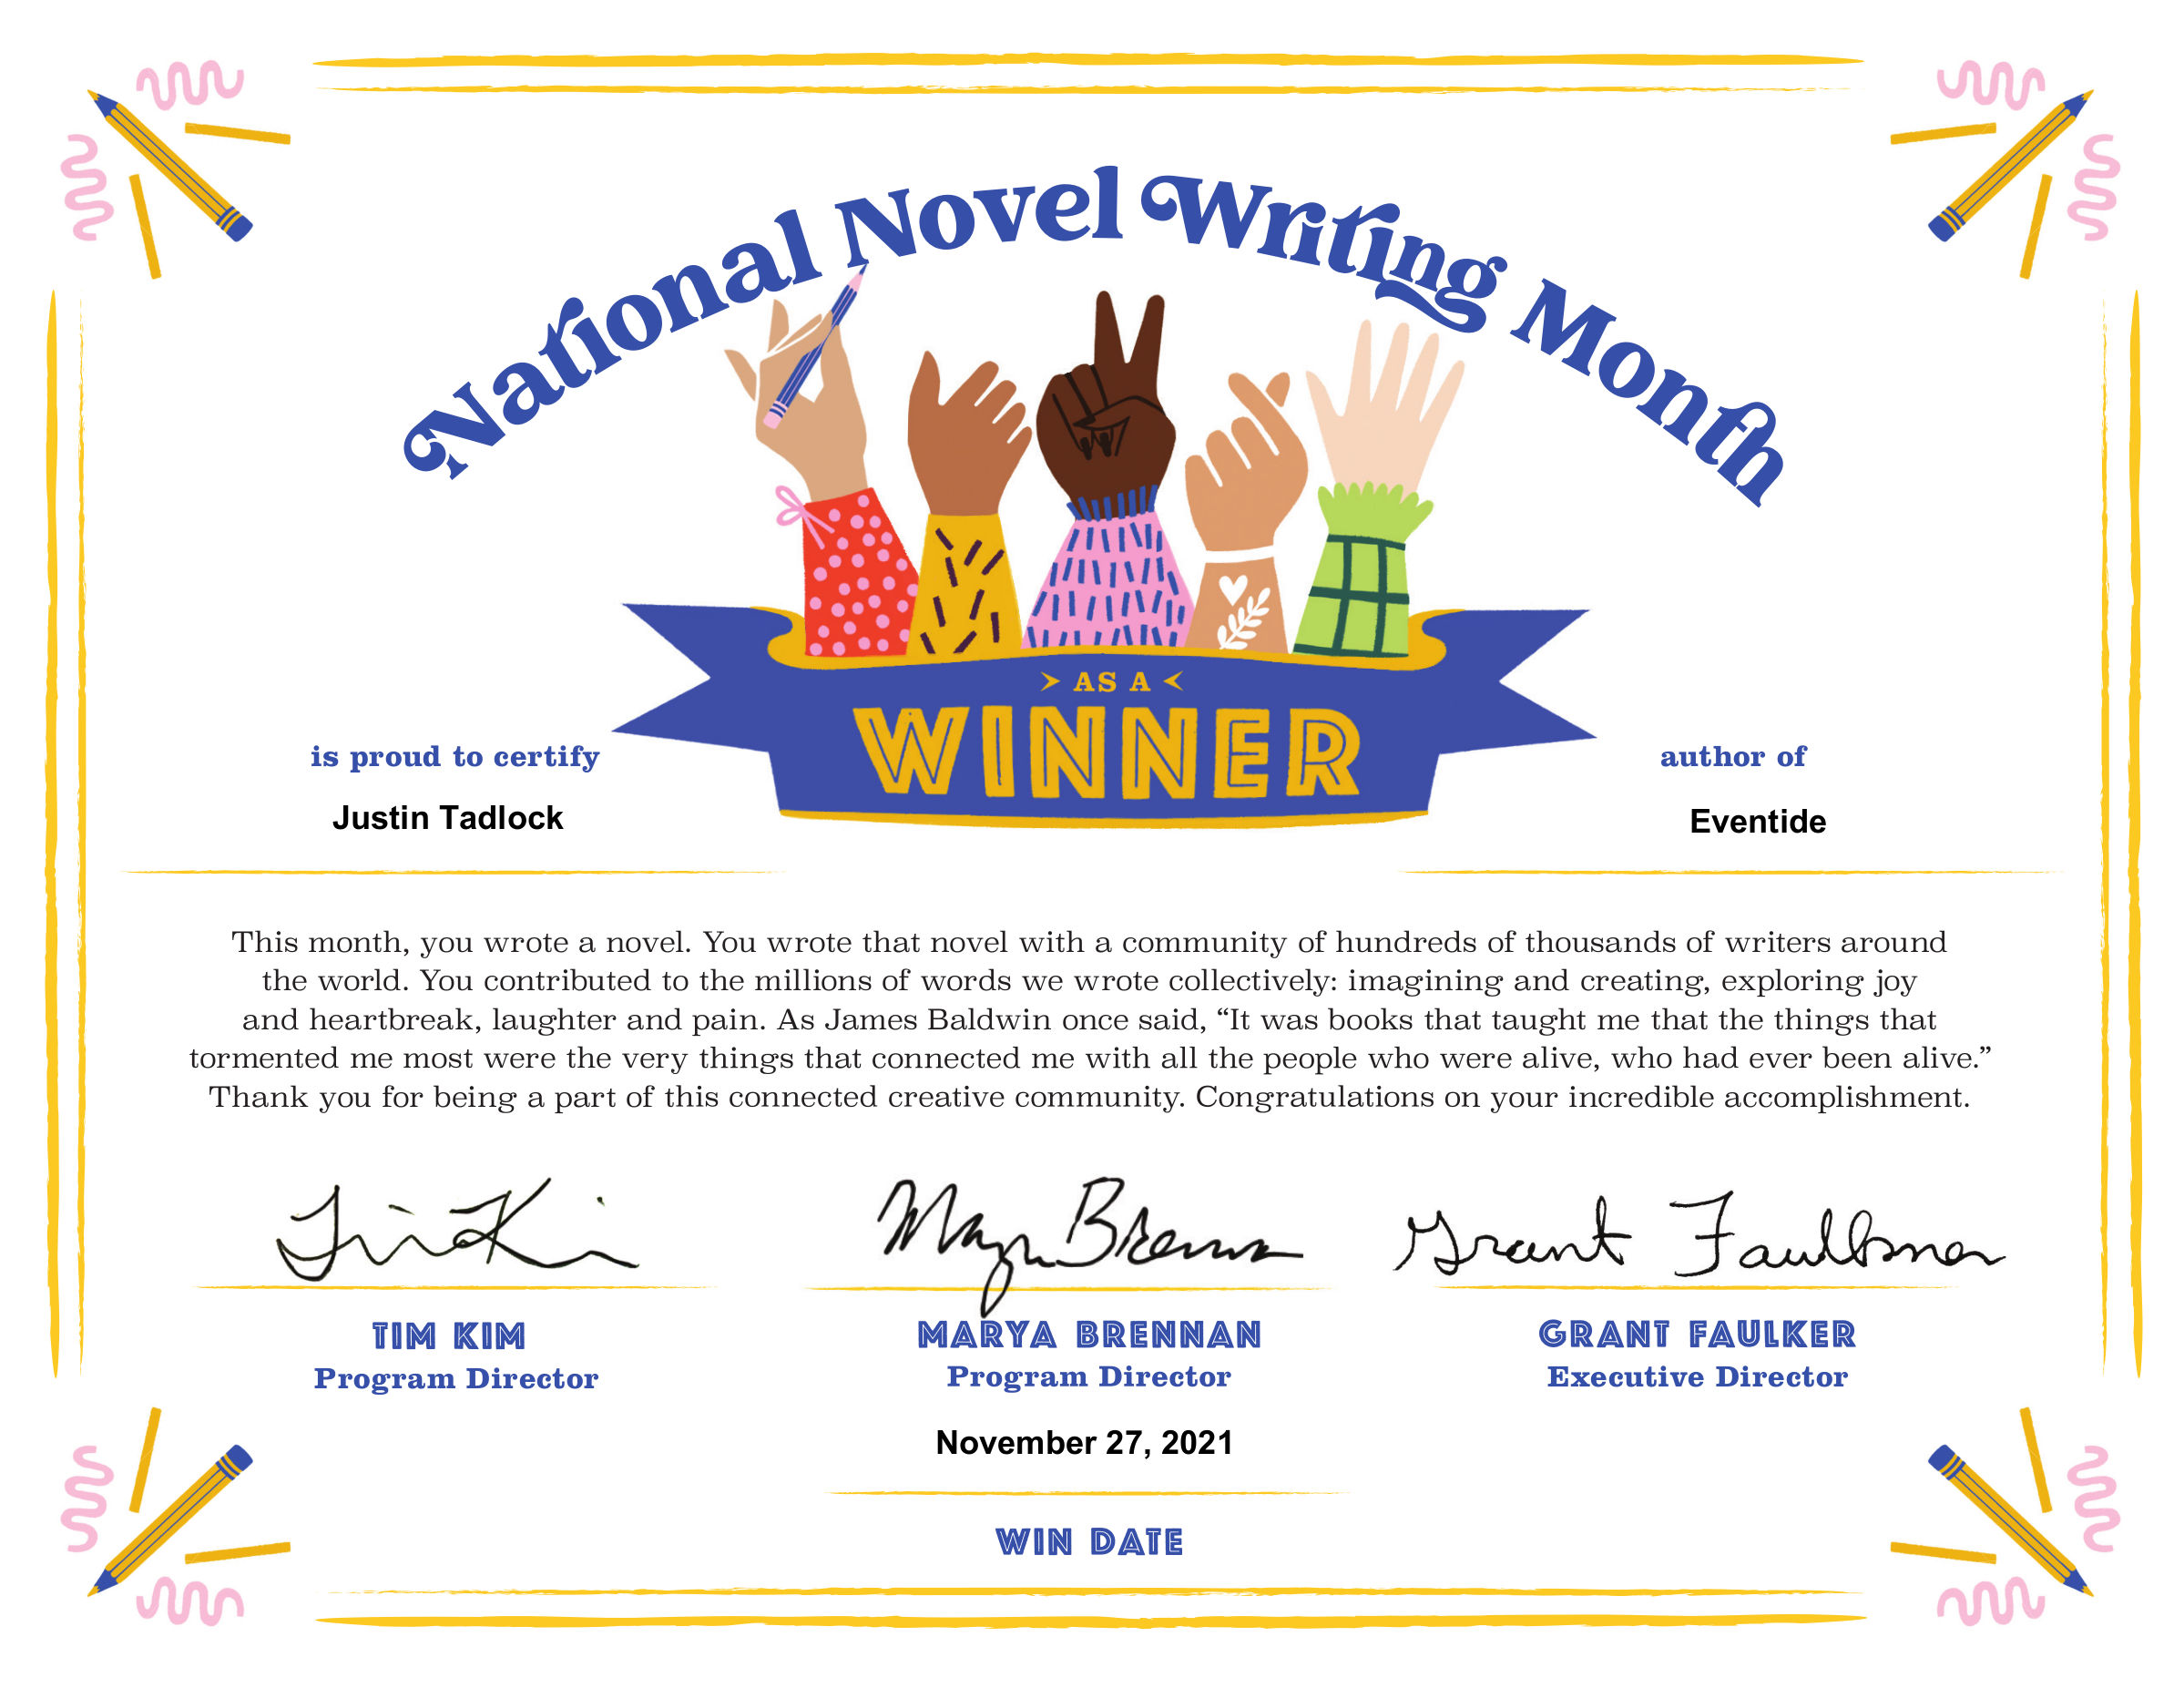 Certificate certifying winning National Novel Writing Month for 2021.